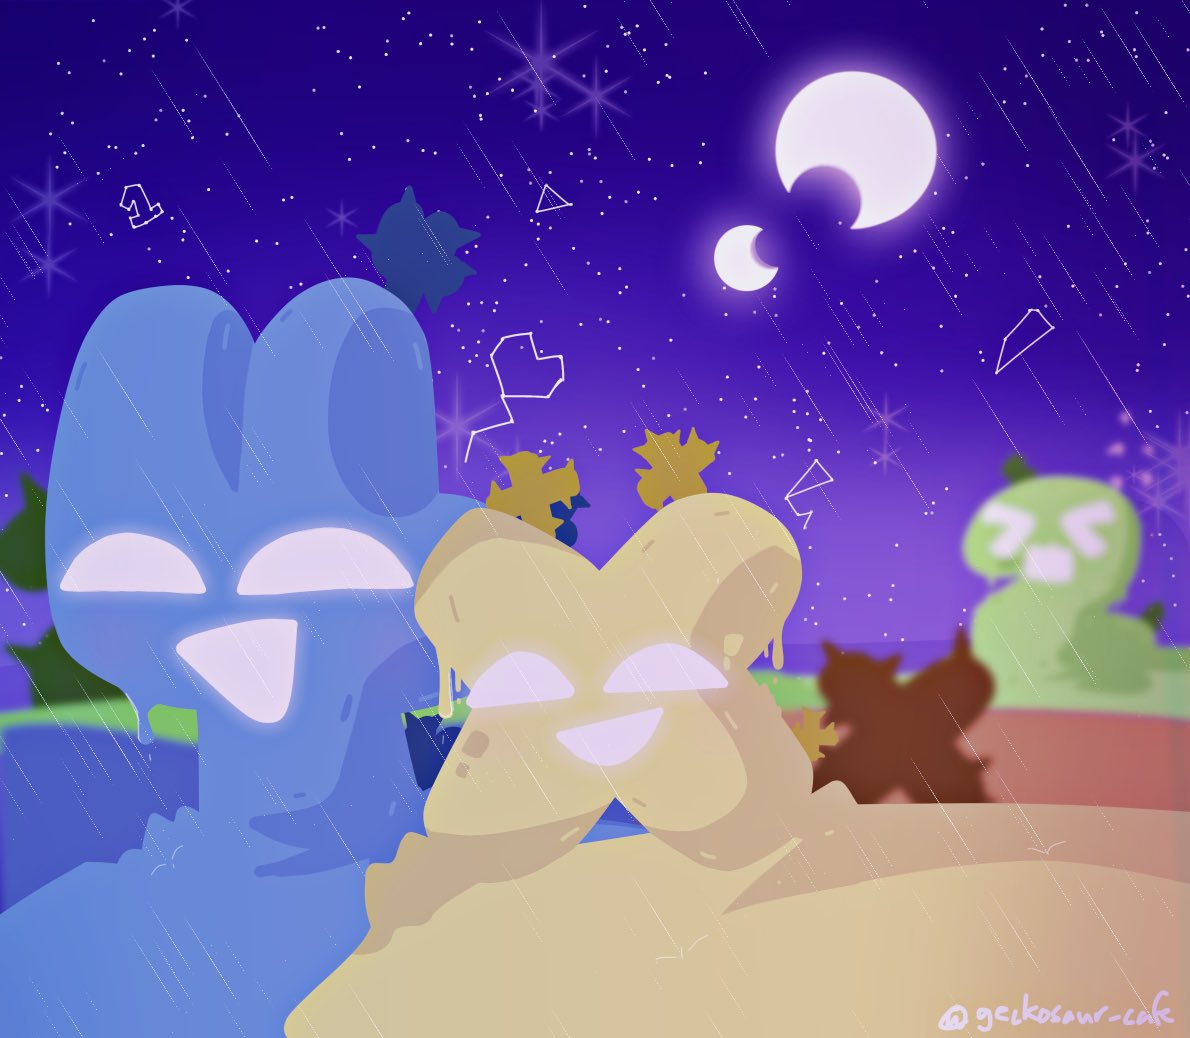 Remember this?

Yes...more!! *evil laughs and runs🏃

(I've rewritten this three times since it keeps deleting jelpp 😭)

[#4x #BFB #bfb30 #bfbfour #bfbx #cactusfourx #osc #objectshowcommunity #objectshow #desertfourx #desertfour #desertx #deserttwo #bfbdesertau #bfbau]